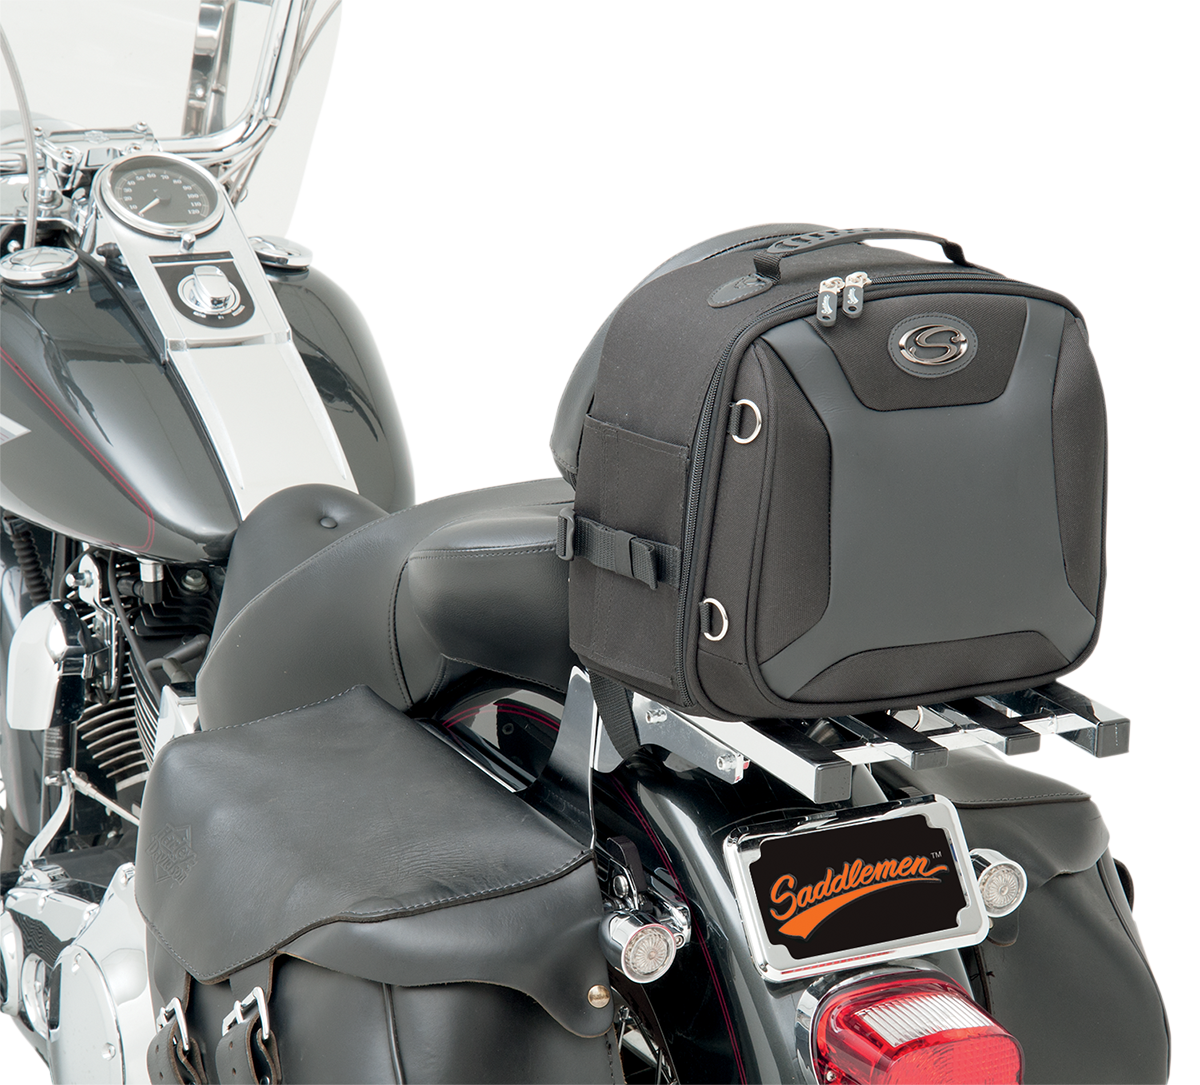 Stunning Photos Of motorcycle sissy bar bag Pictures - 300 motorcycle